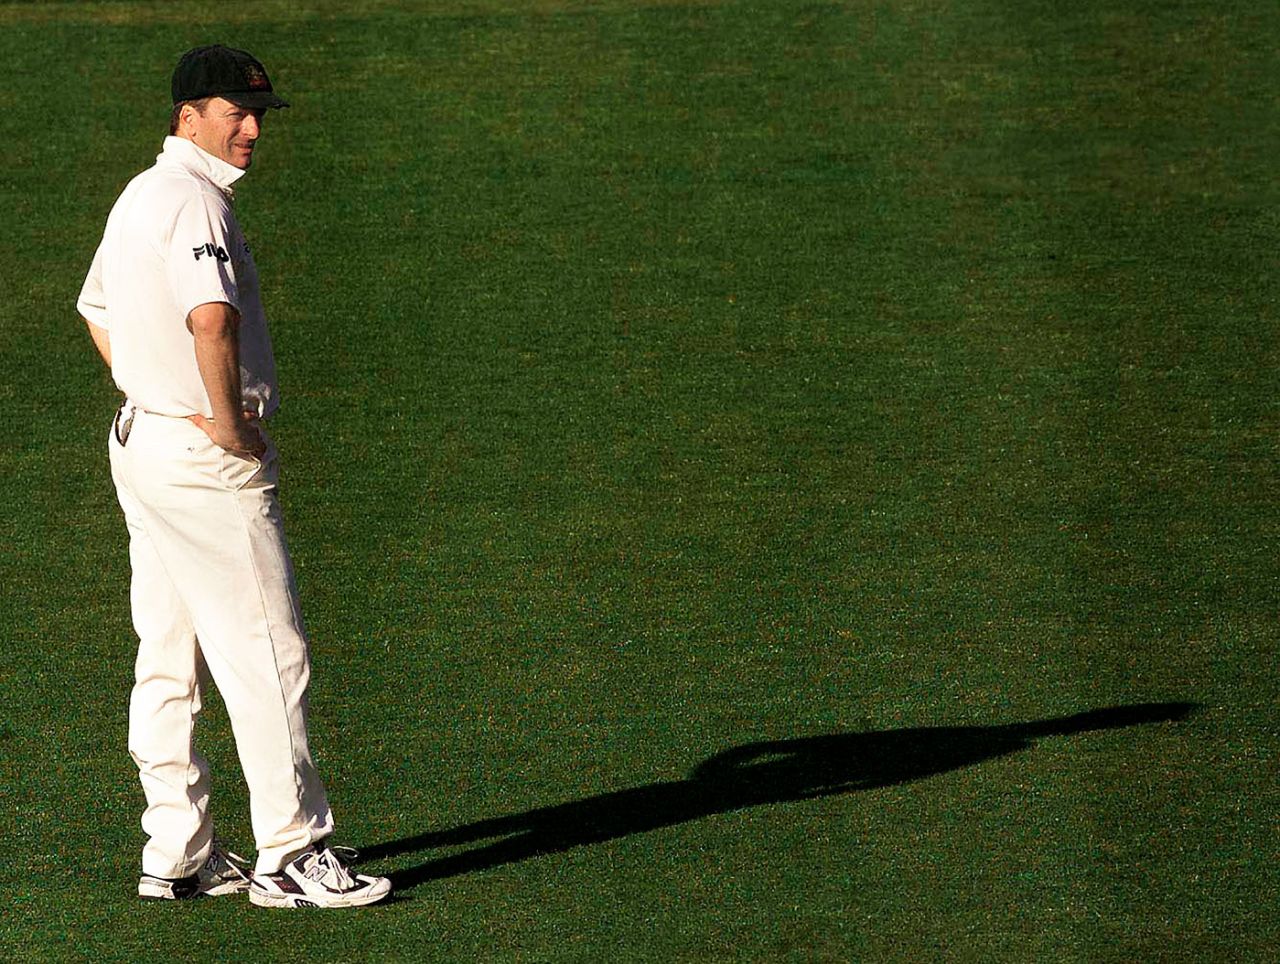 Steve Waugh looks on as Hampshire head towards victory over the Australians, Hampshire v Australians, Rose Bowl, 3rd day, July 30, 2001